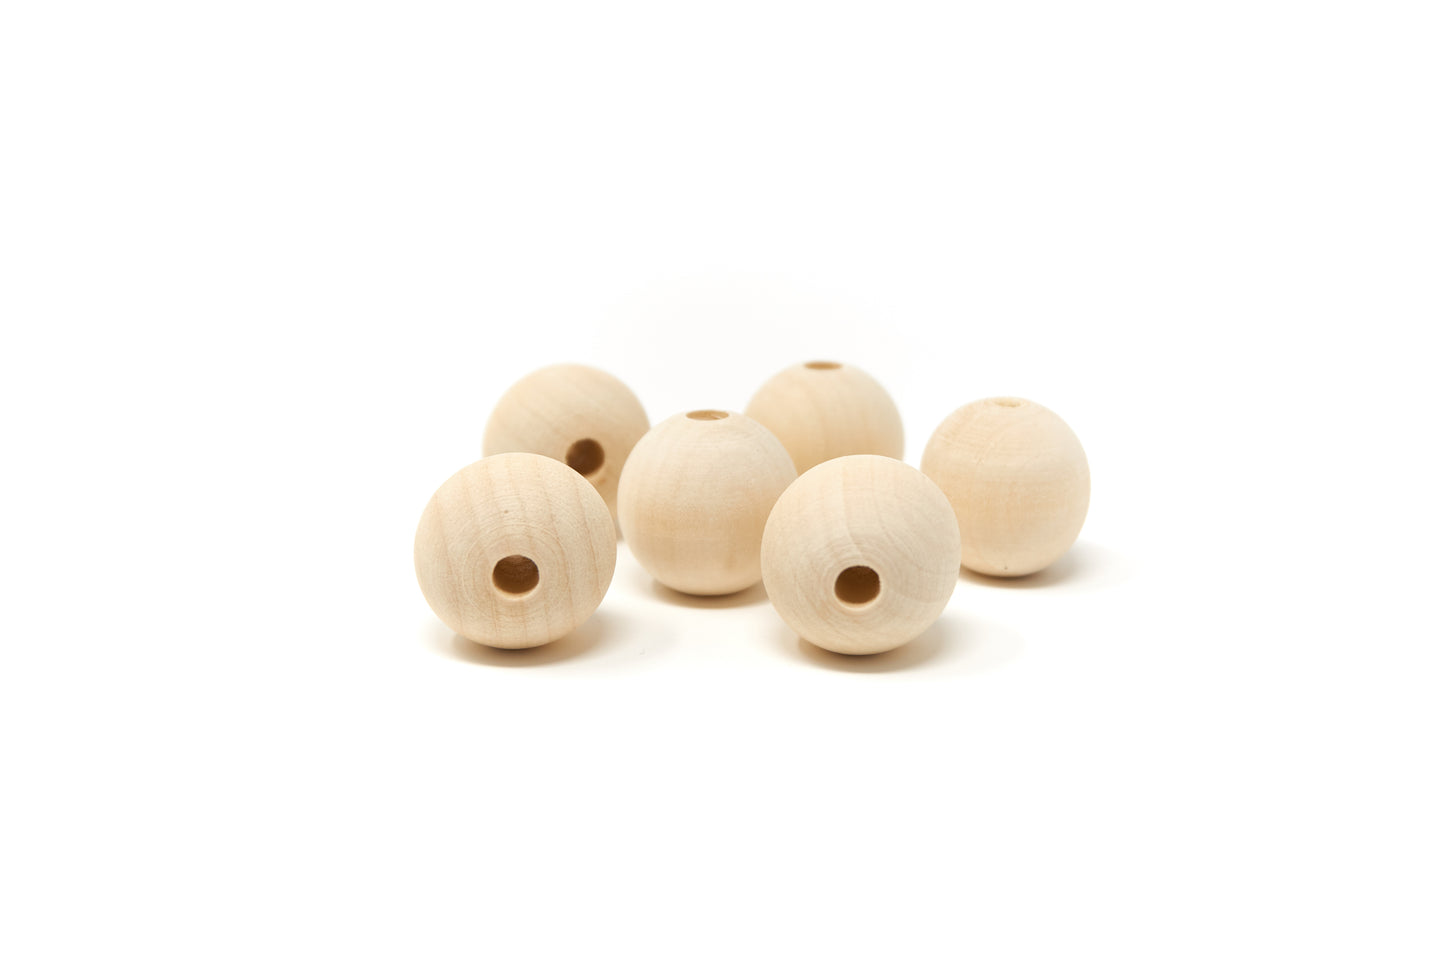 Natural Round Wood Beads 25mm 50 pieces - Cameos Art Shop